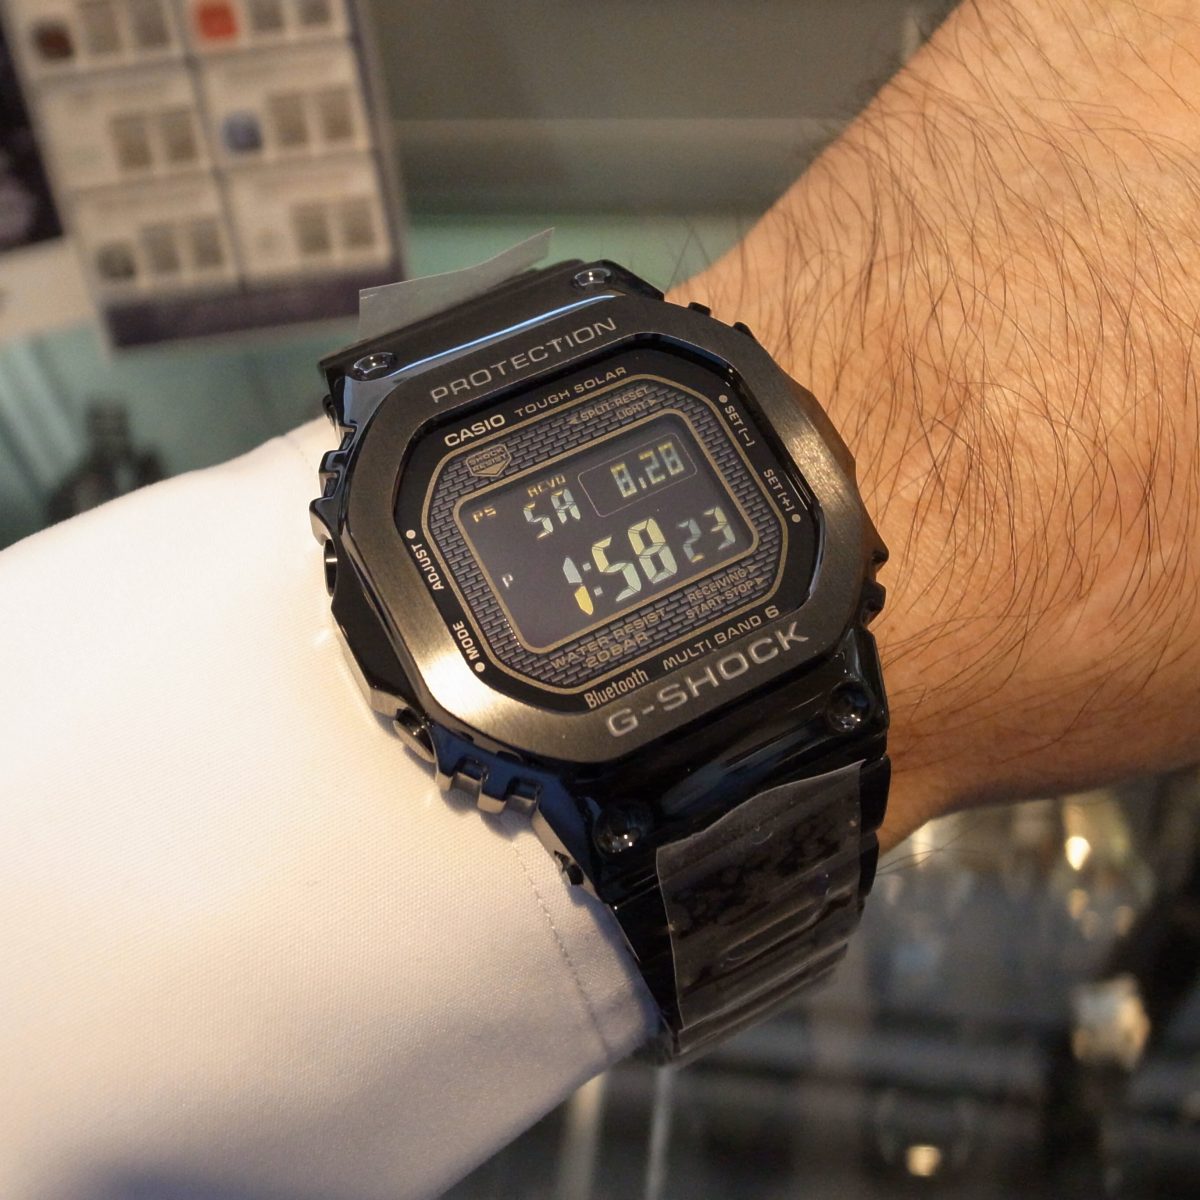 OUTLET 包装 即日発送 代引無料 G-SHOCK GMW-B5000GD-1JF - 通販